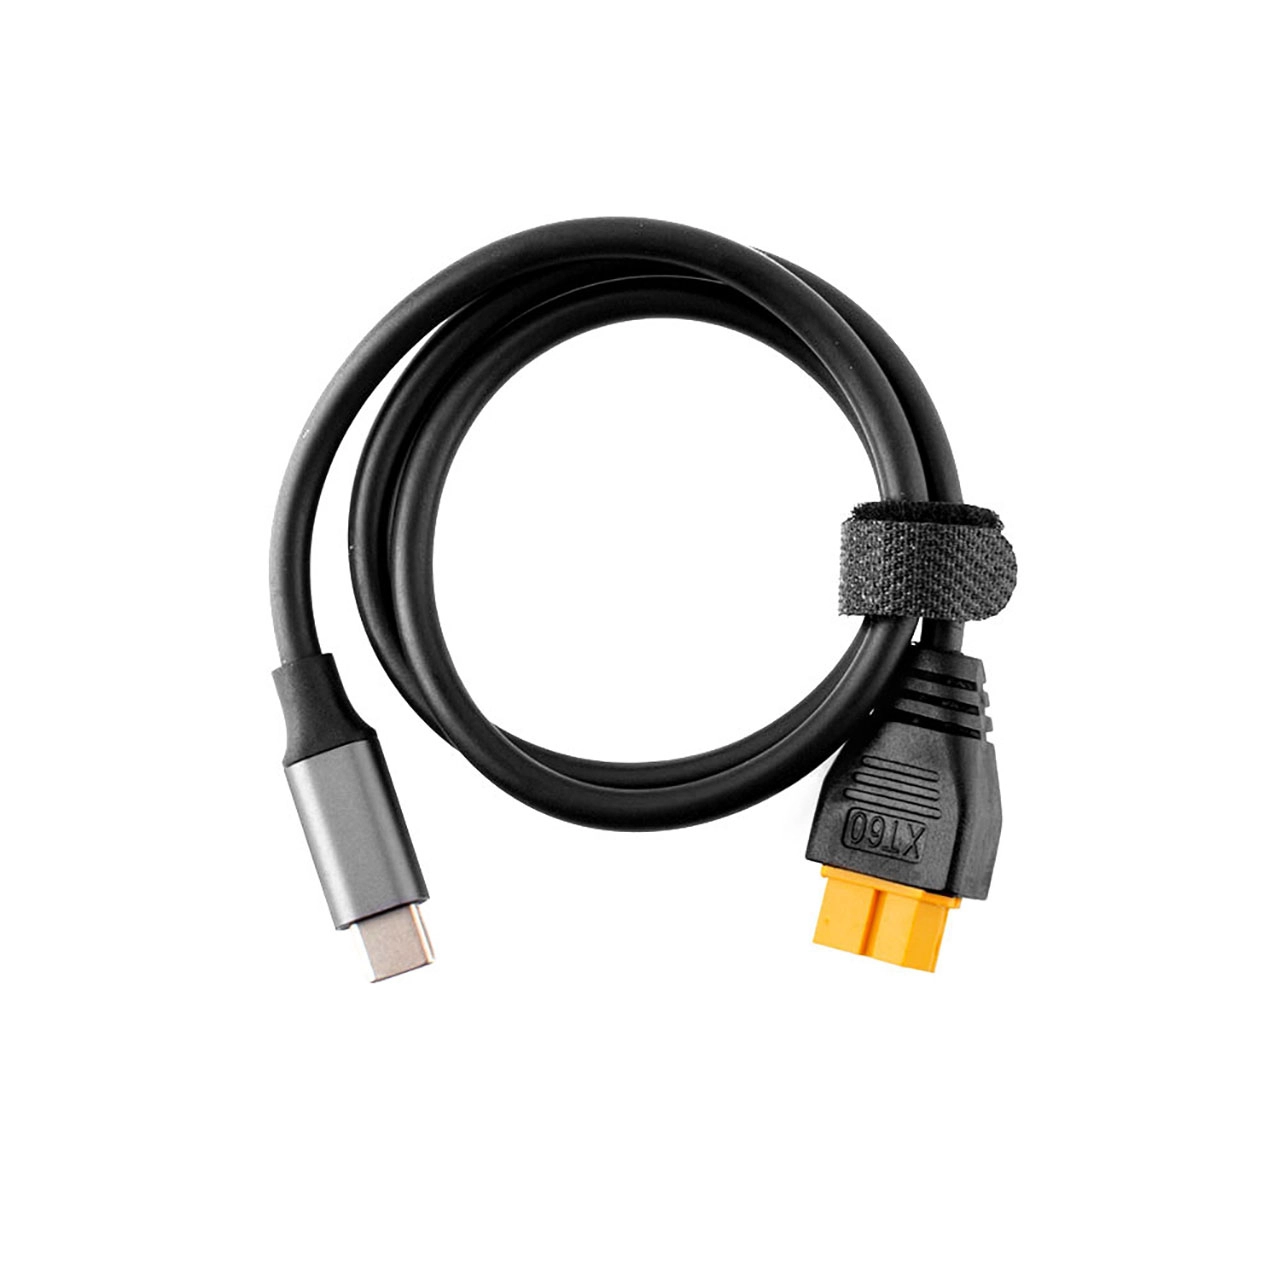 USB-C 5V 2A Power Cable for Blackmagic Design Micro Converter D-tap to Type- C Cable Alvin's Cables 60cm